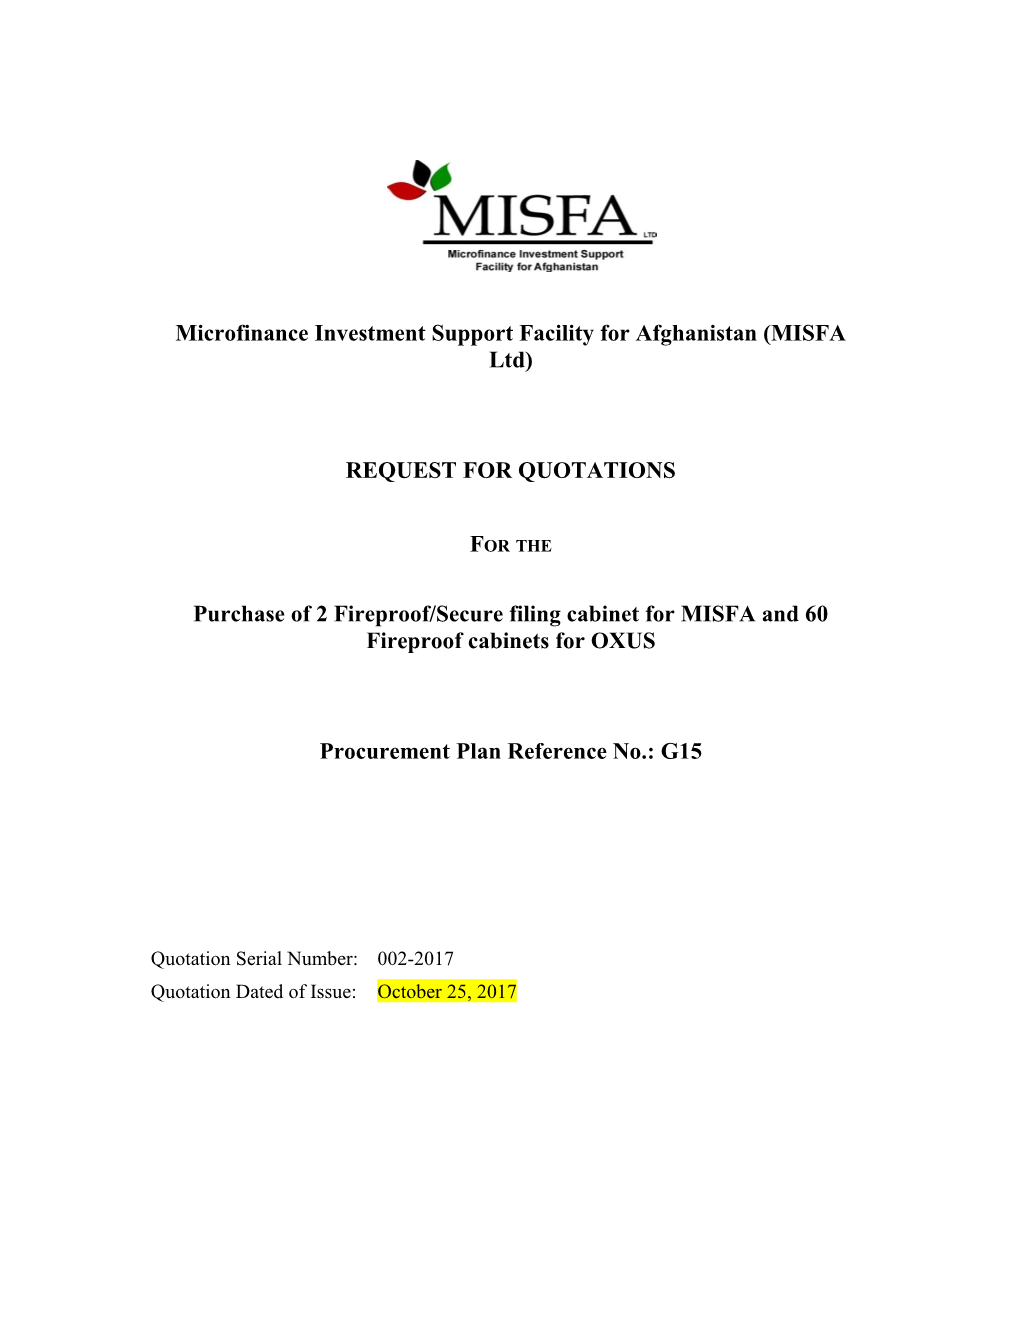 Microfinance Investment Support Facility for Afghanistan (MISFA Ltd)